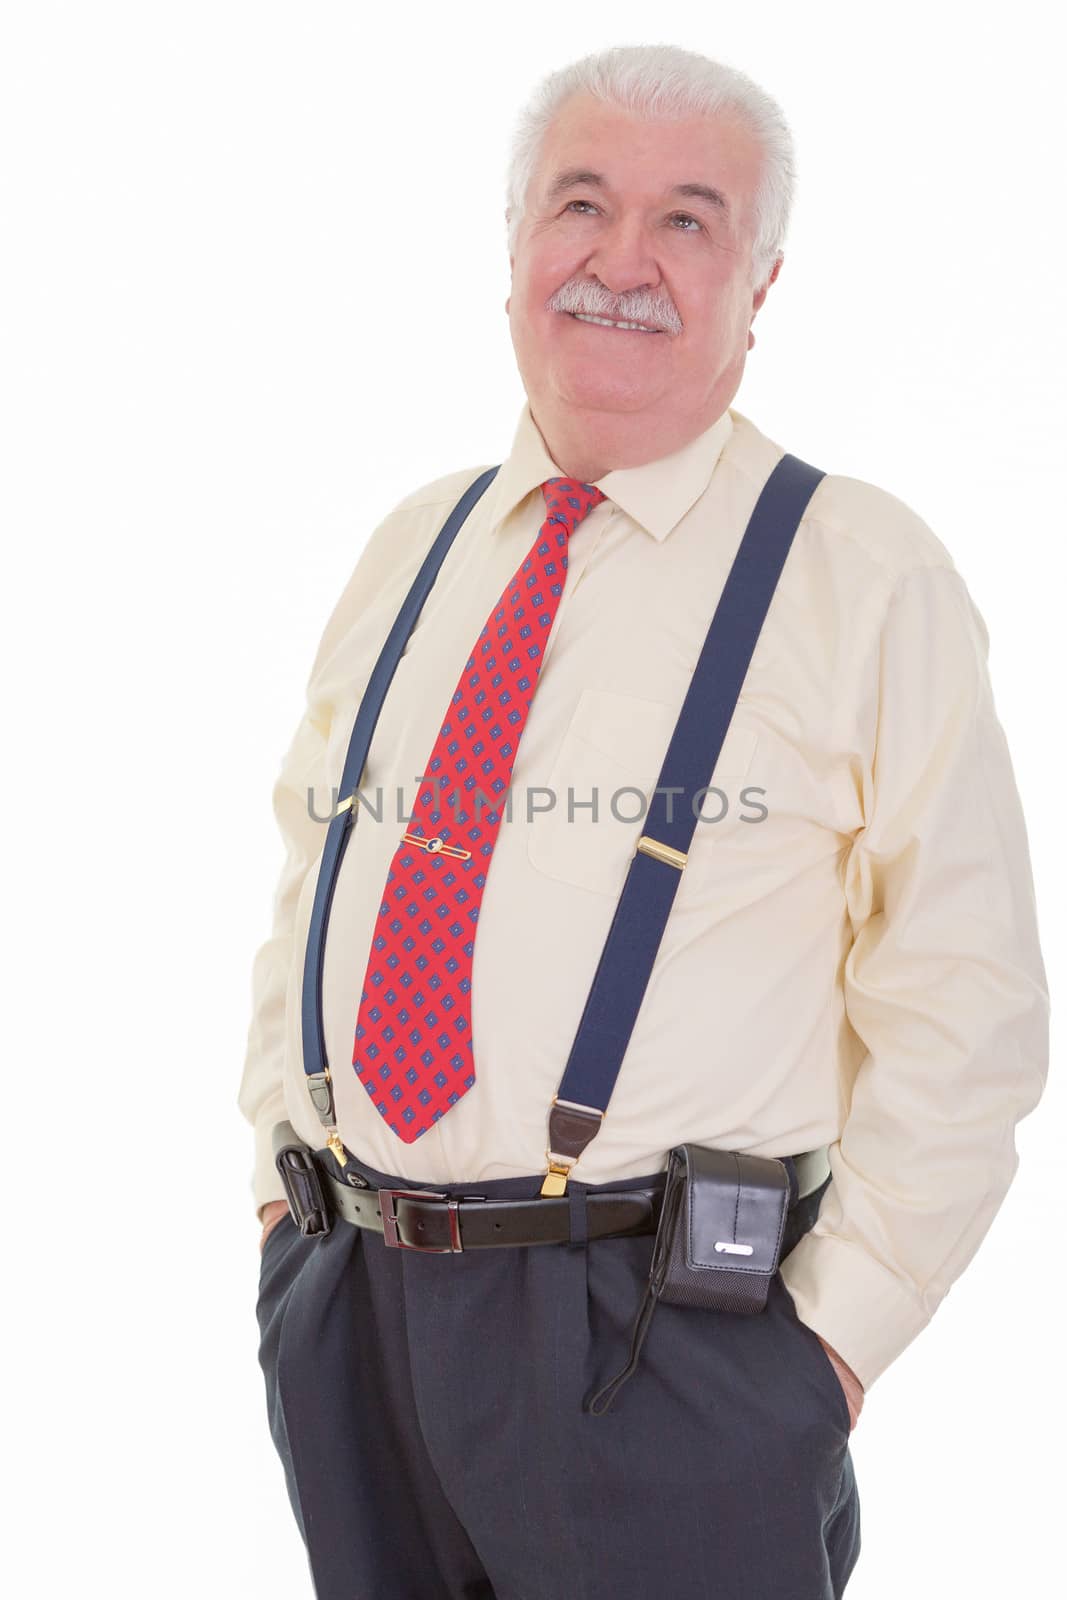 A portrait of a senior gentlemen, dressed in shirt and tie with braces, smiling wistfully.